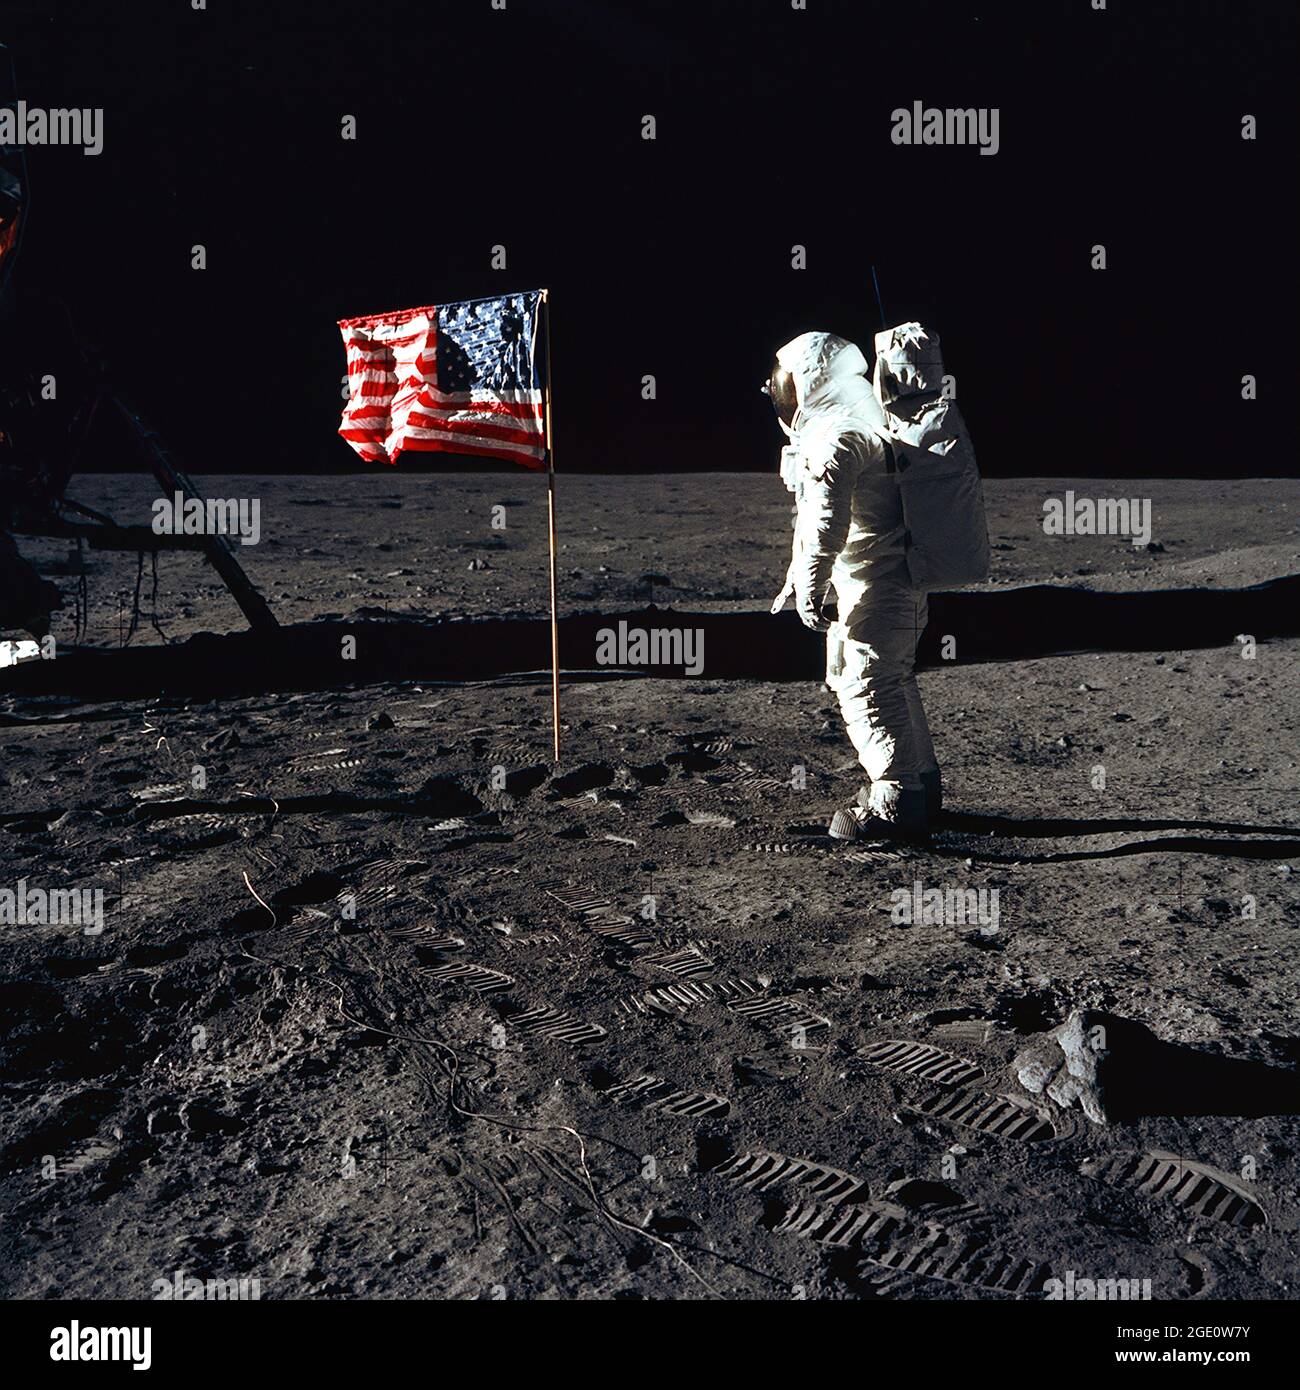 Astronaut Buzz Aldrin, lunar module pilot of the first lunar landing mission, poses for a photograph beside the deployed United States flag during an Apollo 11 Extravehicular Activity (EVA) on the lunar surface. The Lunar Module (LM) is on the left, and the footprints of the astronauts are clearly visible in the soil of the Moon. Astronaut Neil A. Armstrong, commander, took this picture with a 70mm Hasselblad lunar surface camera. While astronauts Armstrong and Aldrin descended in the LM, the 'Eagle', to explore the Sea of Tranquility region of the Moon, astronaut Michael Collins. Stock Photo